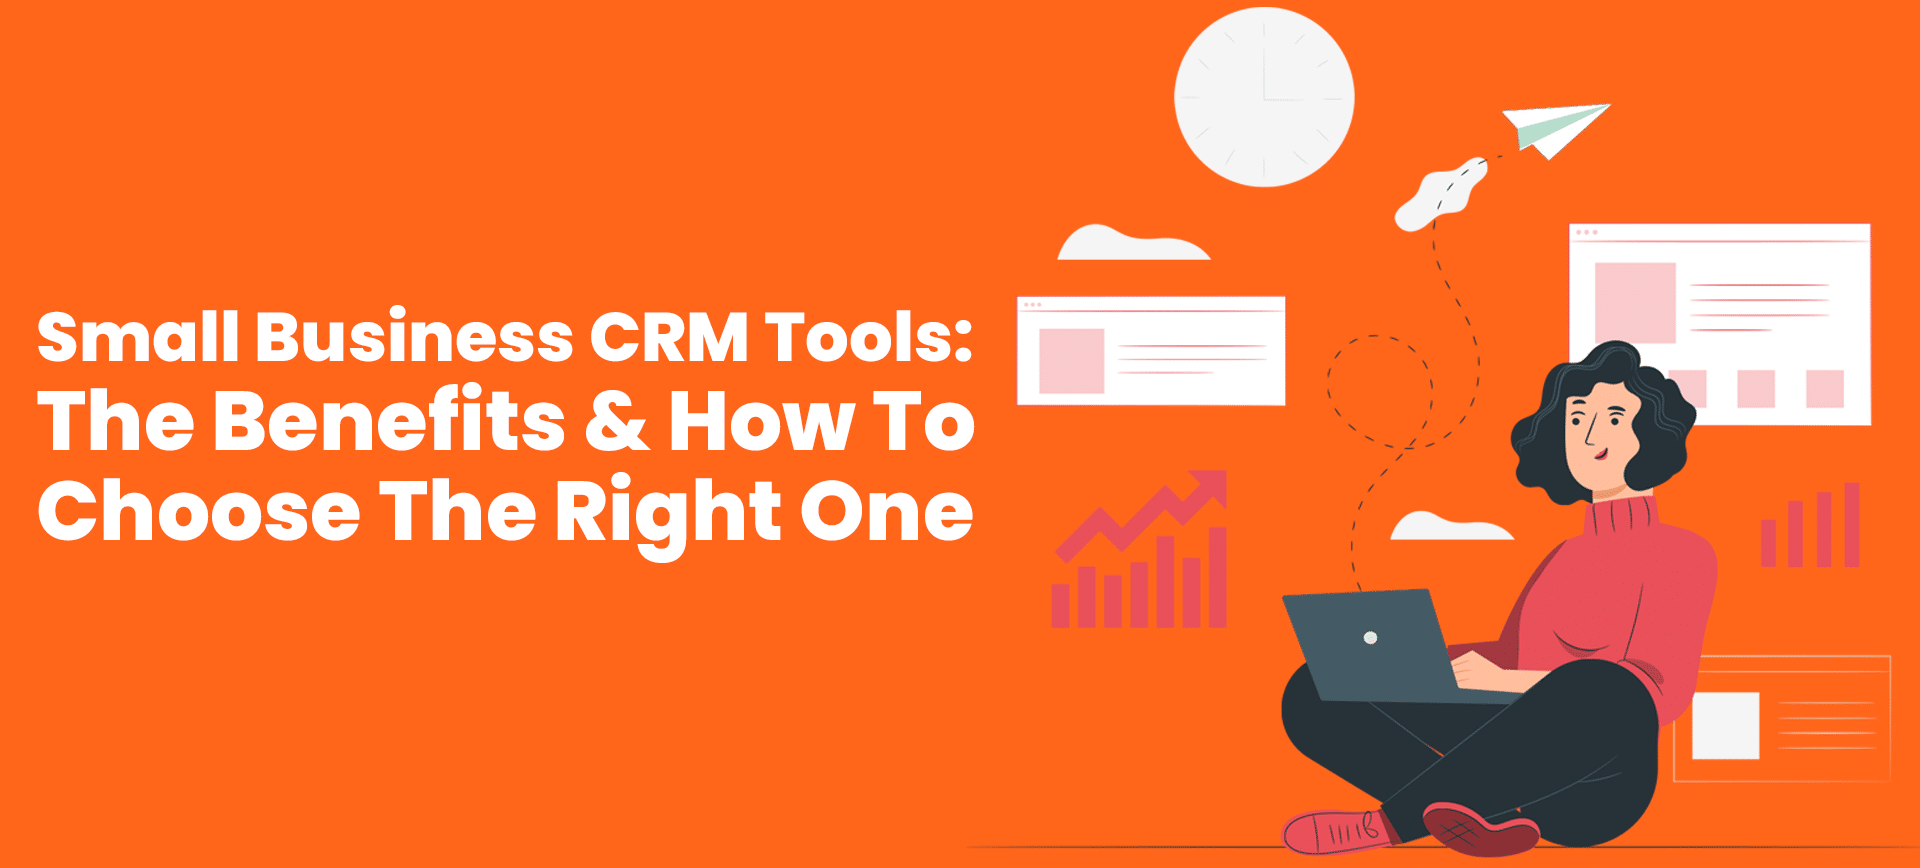 Small Business CRM Tools: The Benefits & How To Choose The Right One